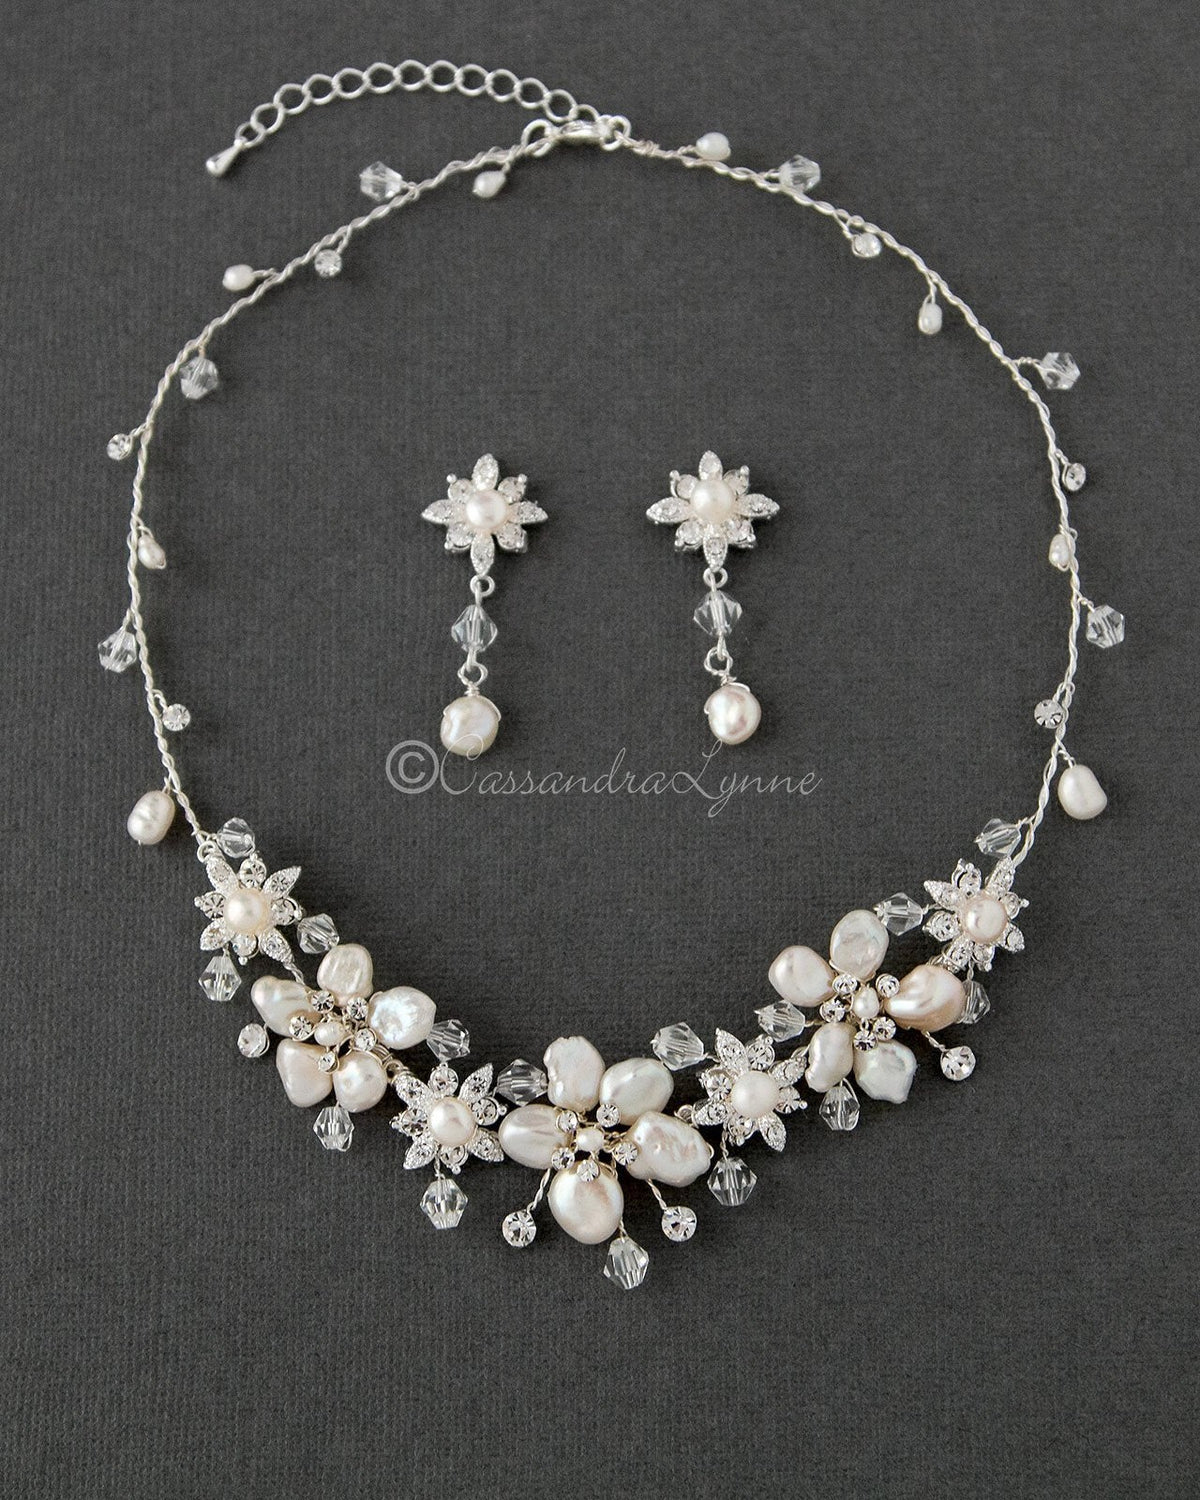 Bridal Necklace of Keshi Pearls and Crystals